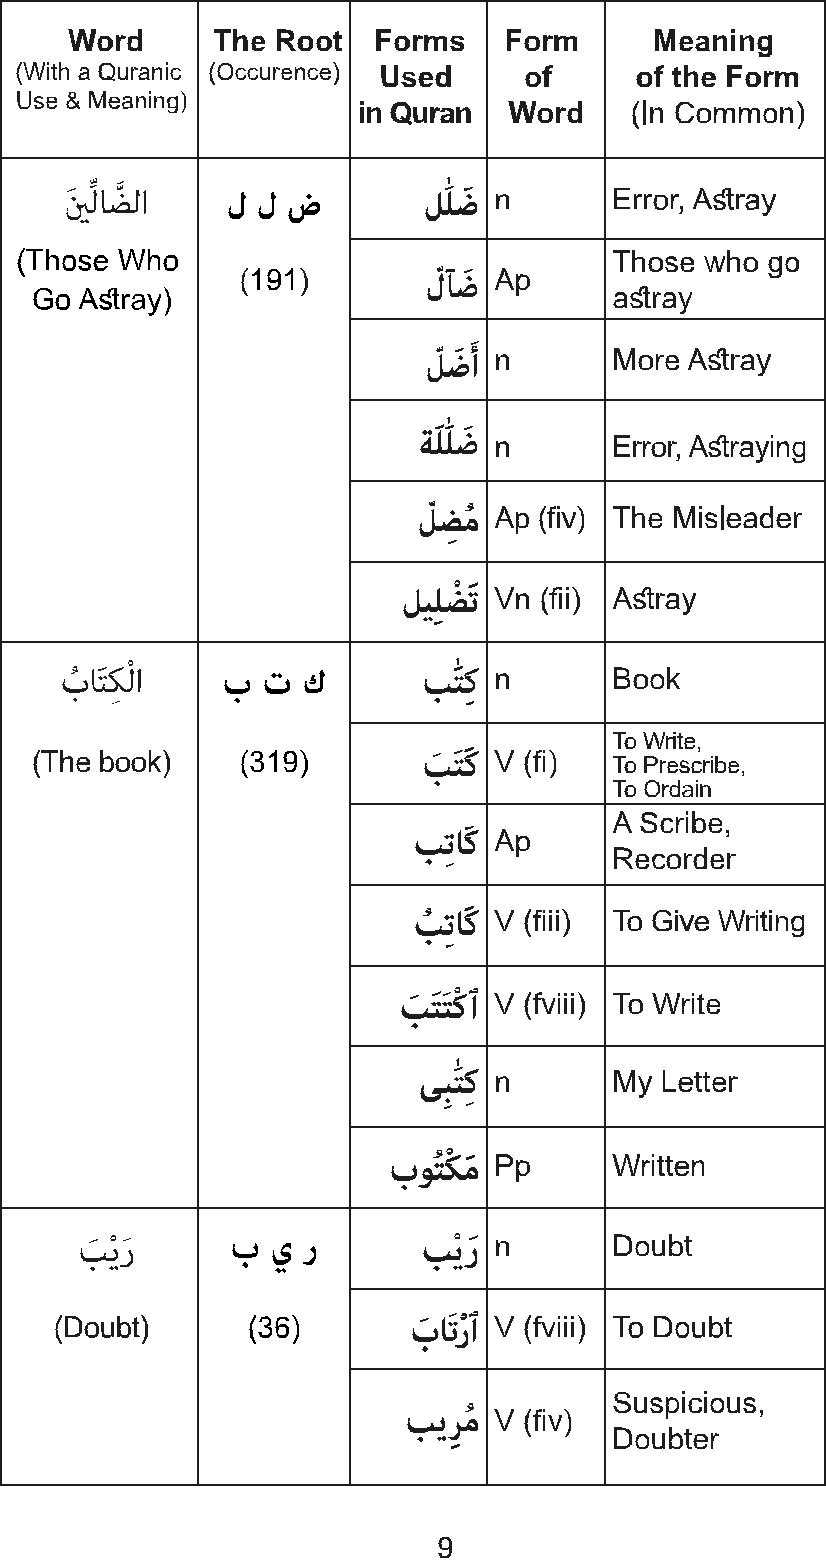 The Golden Words Dictionary of the Holy Quran - The Root Words and Their Forms - photo 11